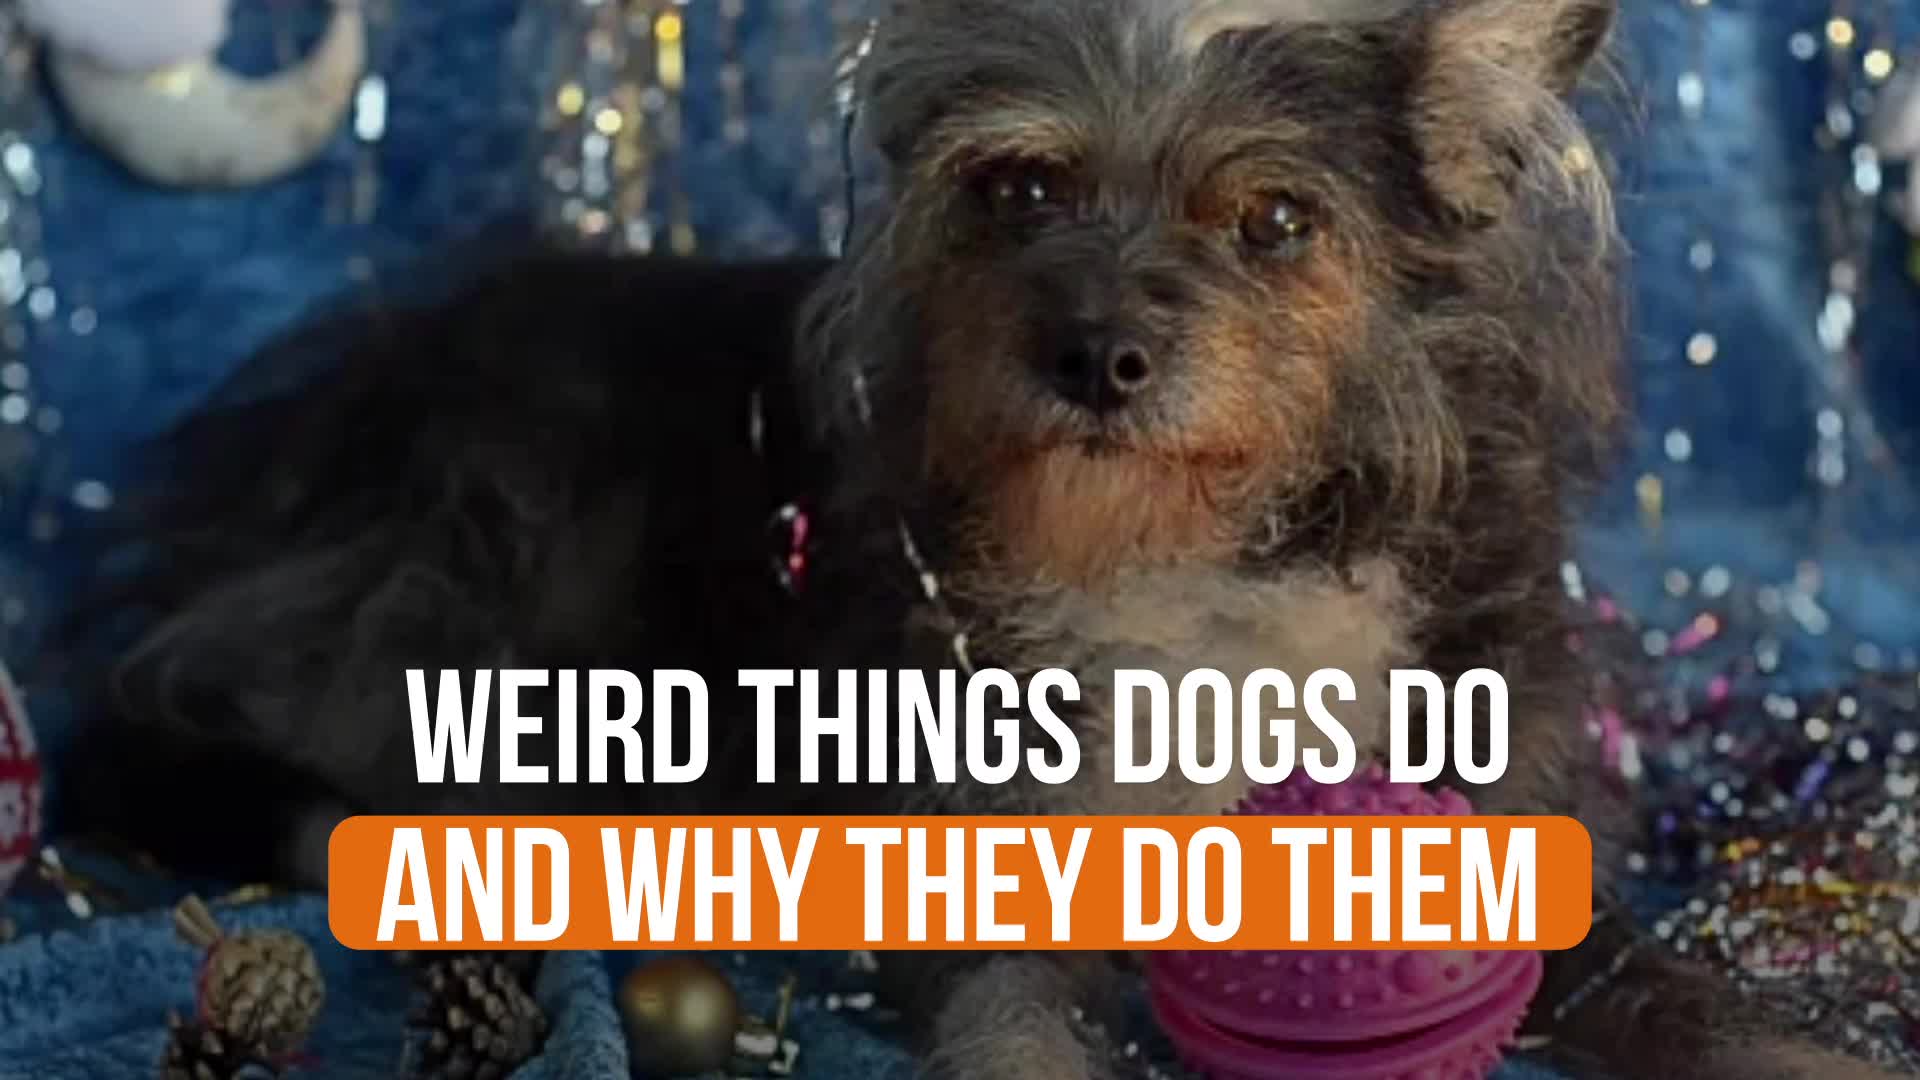 why do dogs eat weird things